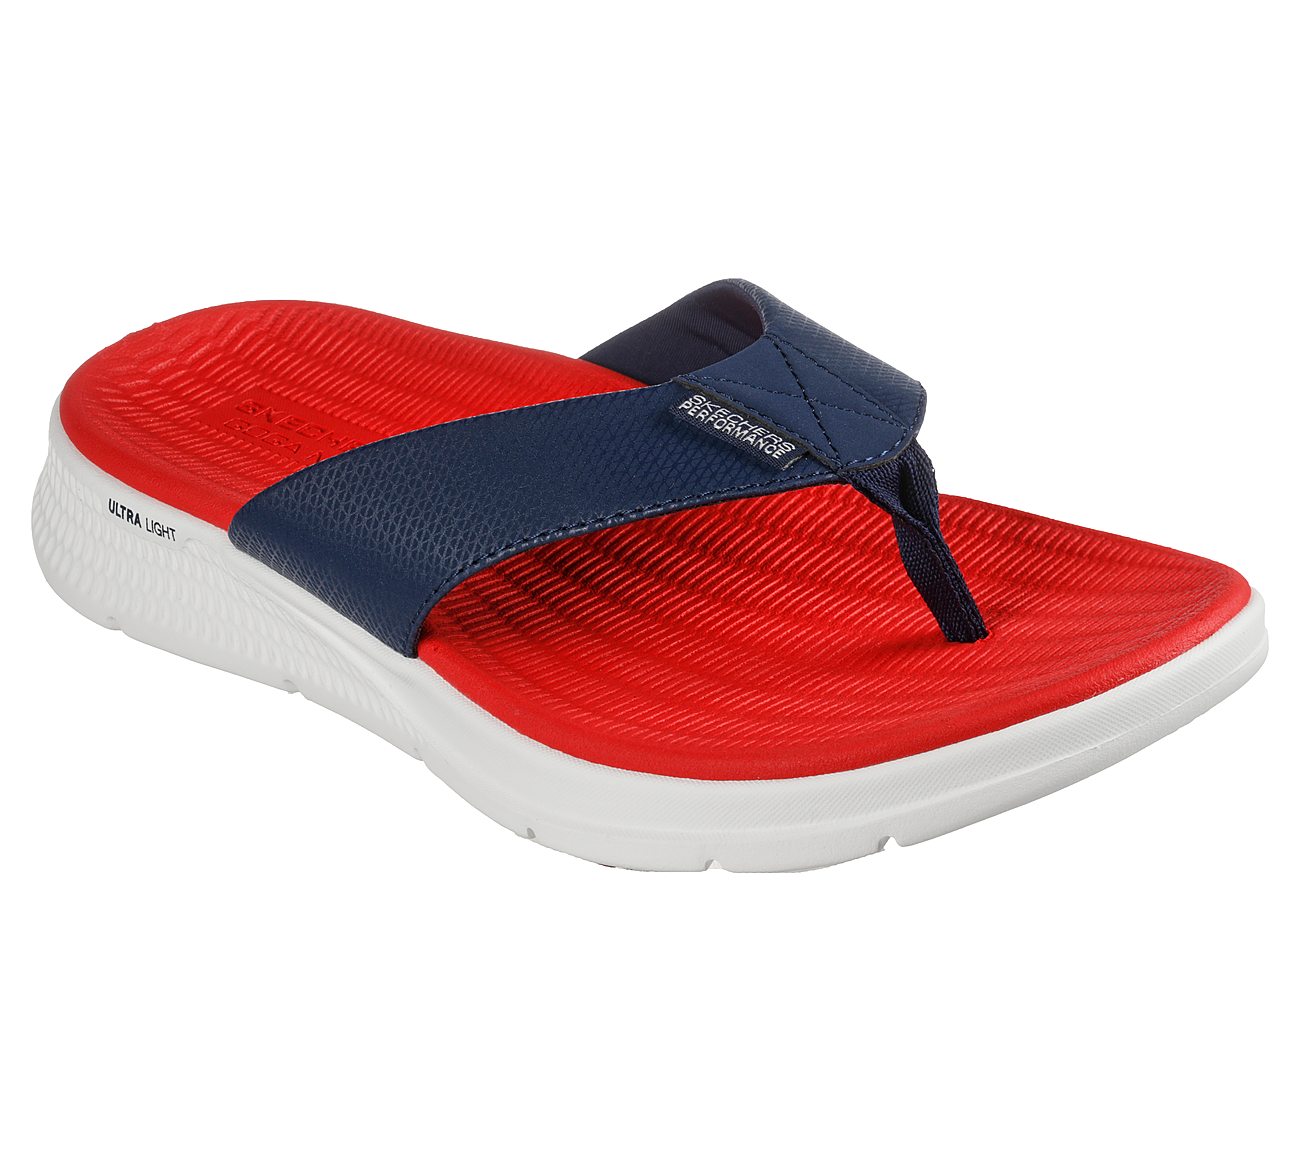 GO CONSISTENT SANDAL-SYNTHWAV, NAVY/RED Footwear Lateral View